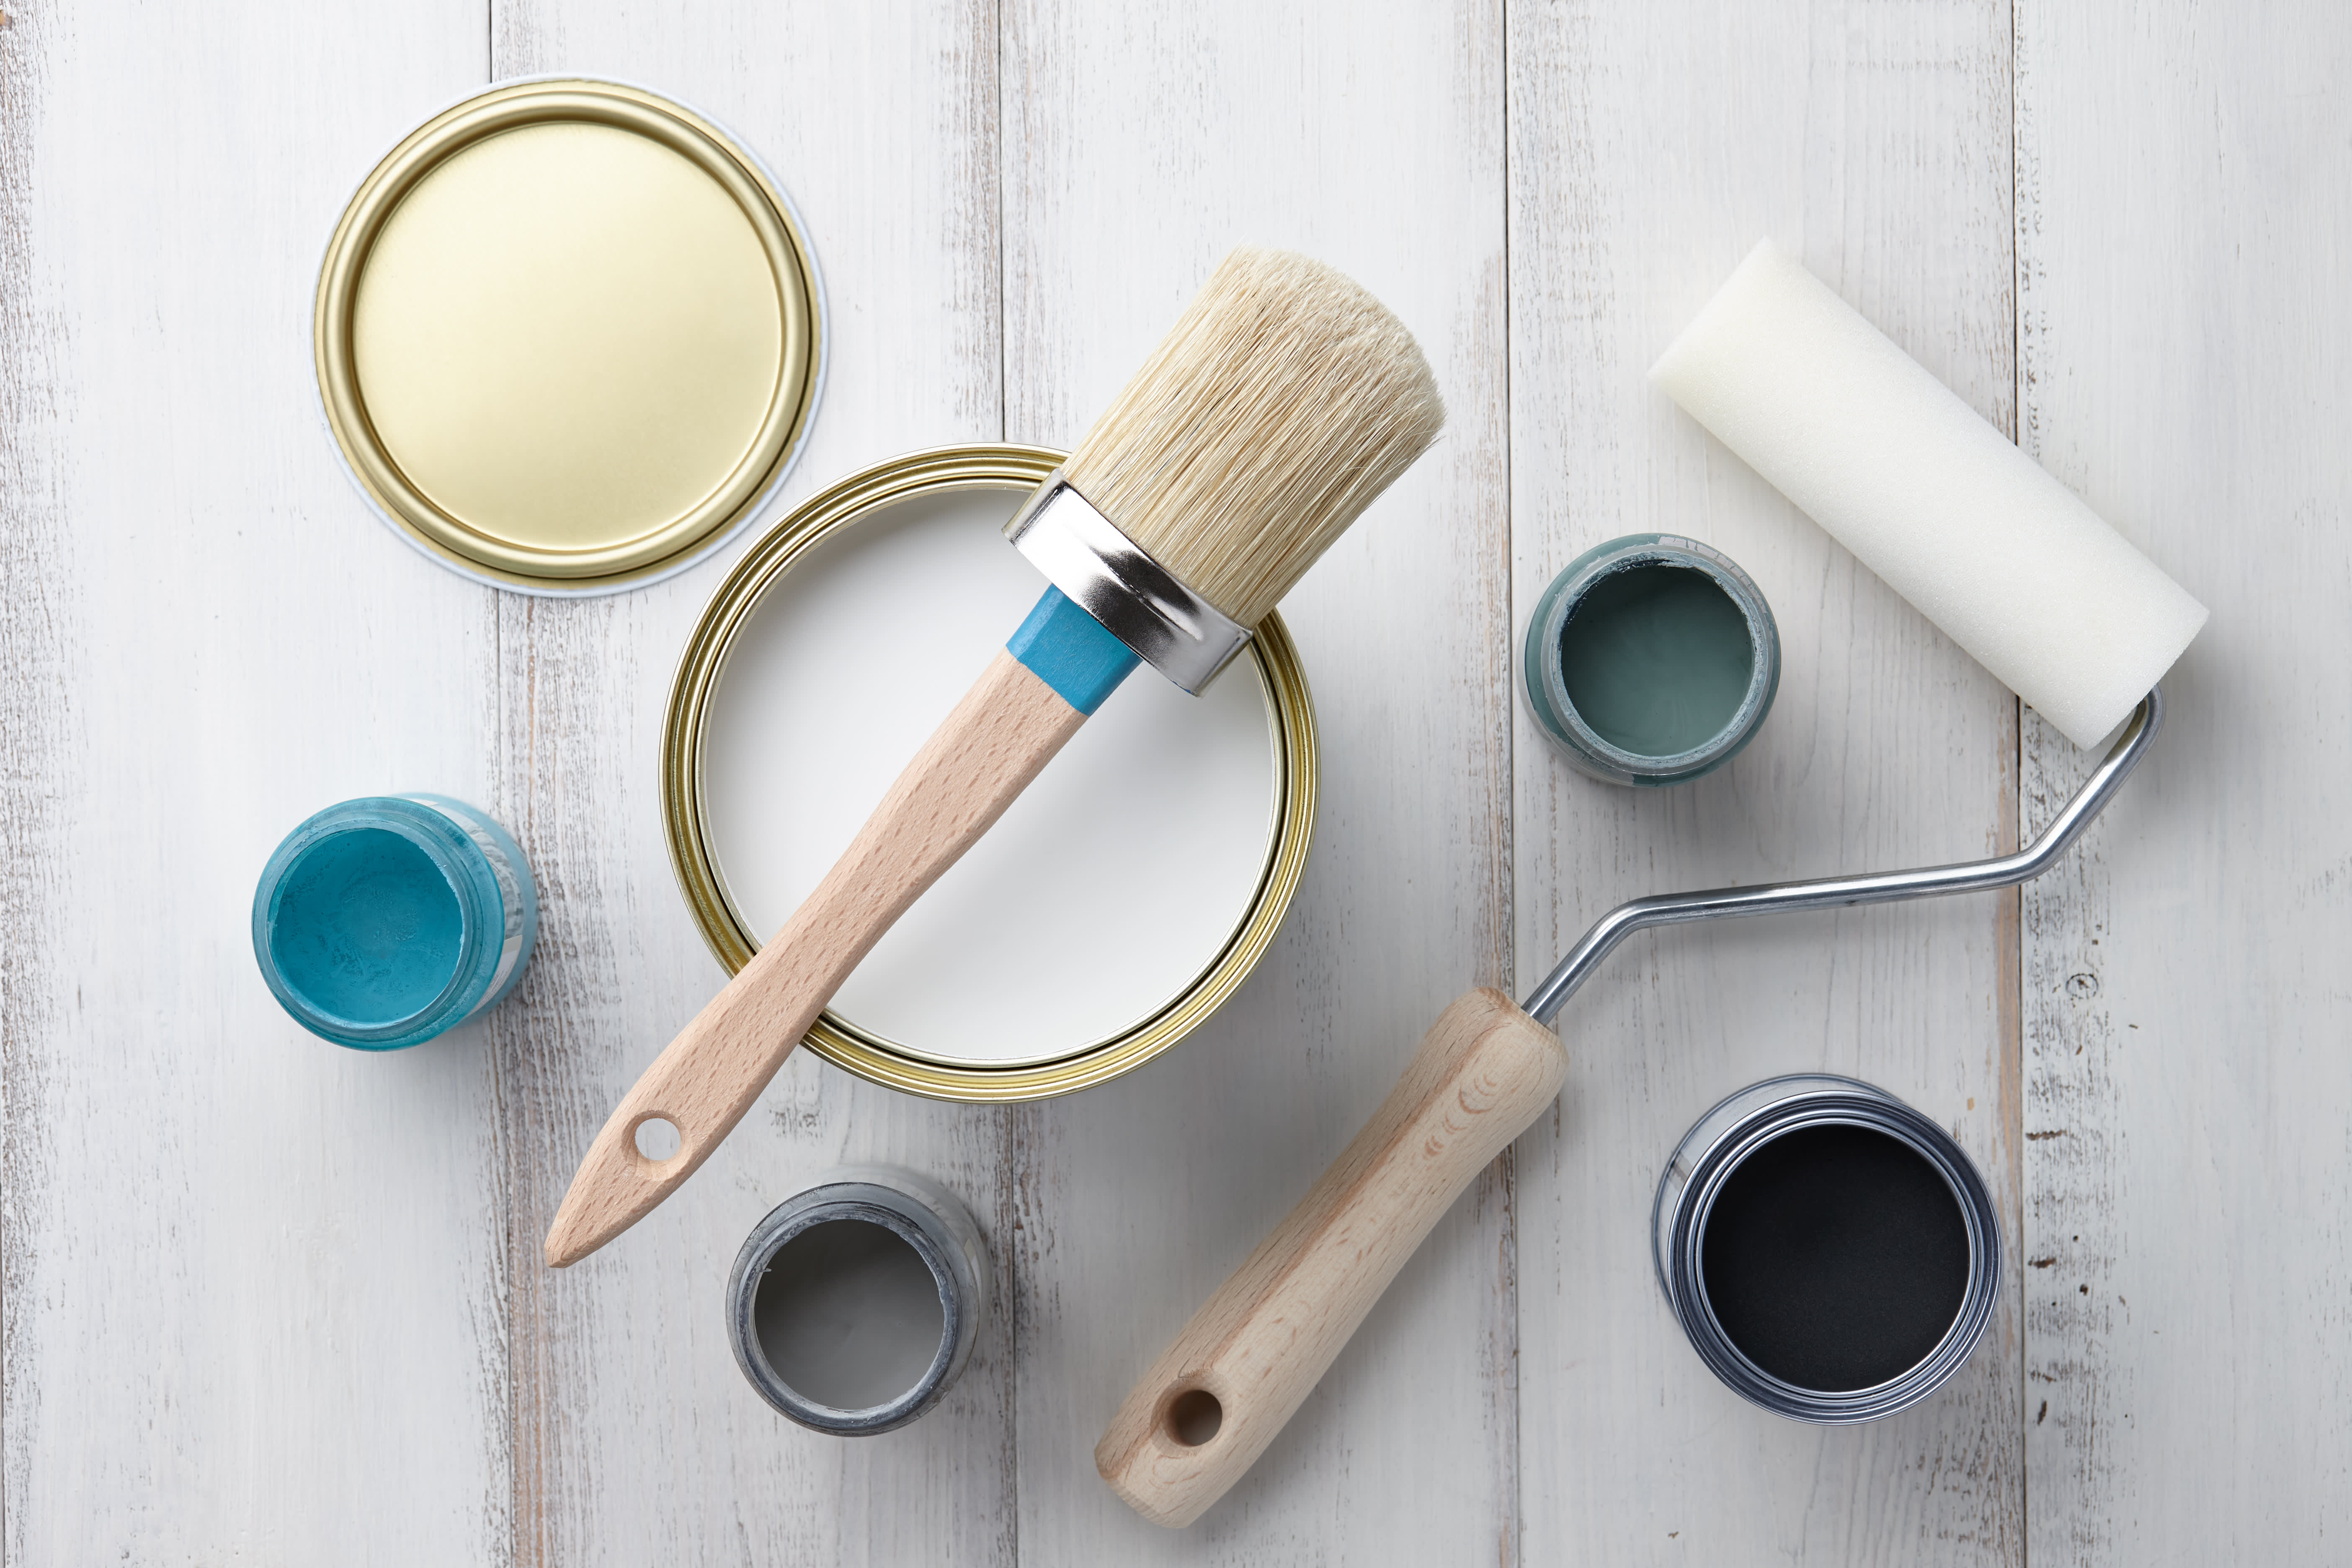 All the Supplies to Paint a Room You Need